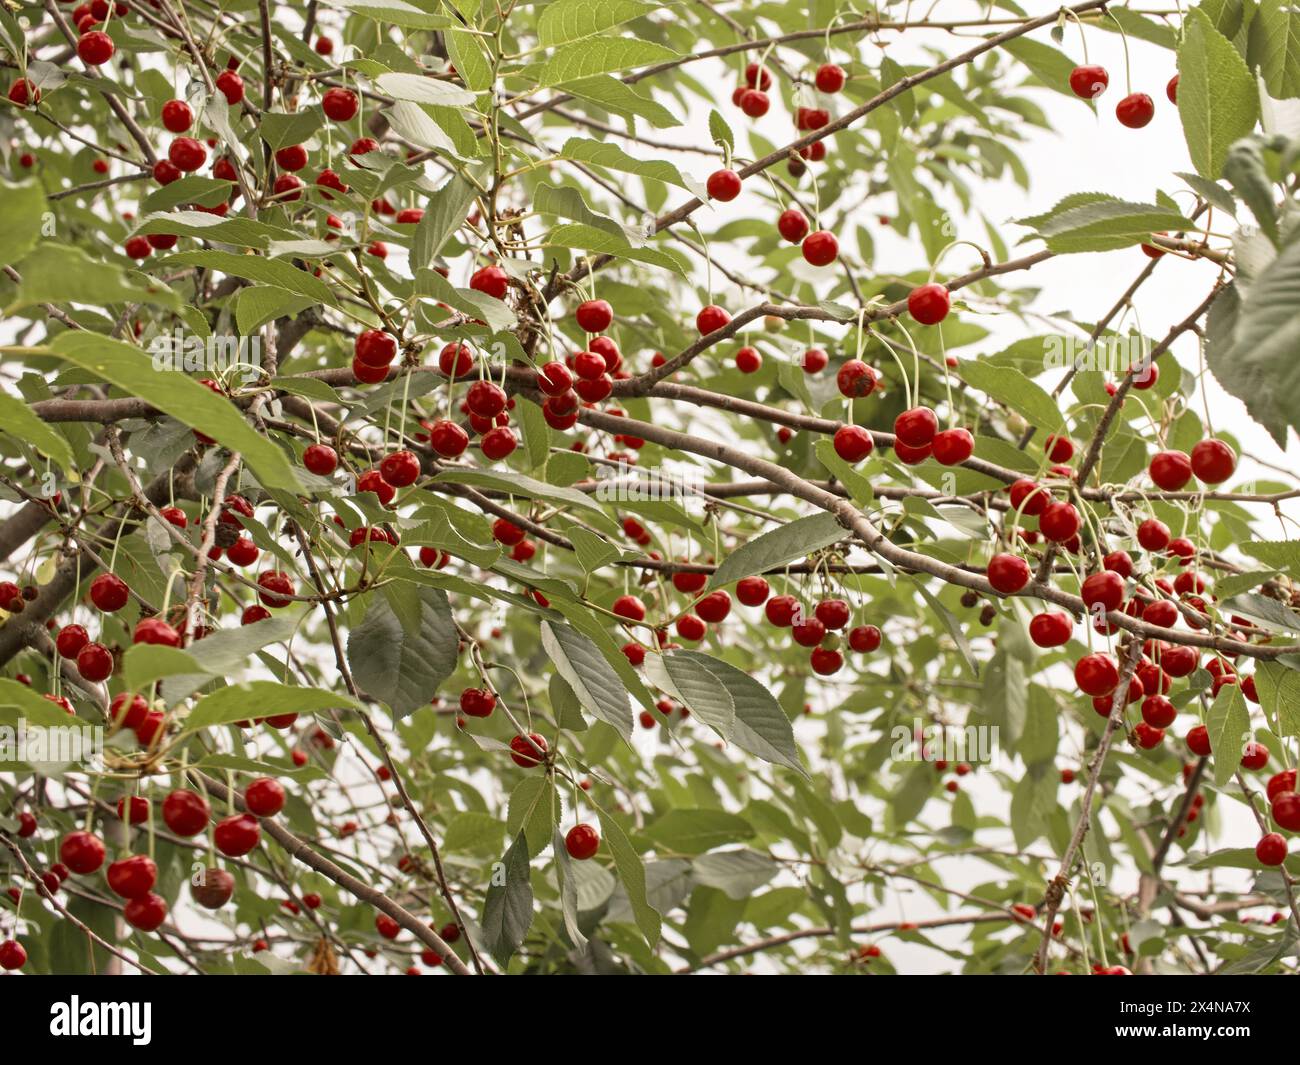 Ripe cherries adorn tree branches, surrounded by lush leaves; an epitome of summer’s bounty and nature’s generosity. Stock Photo